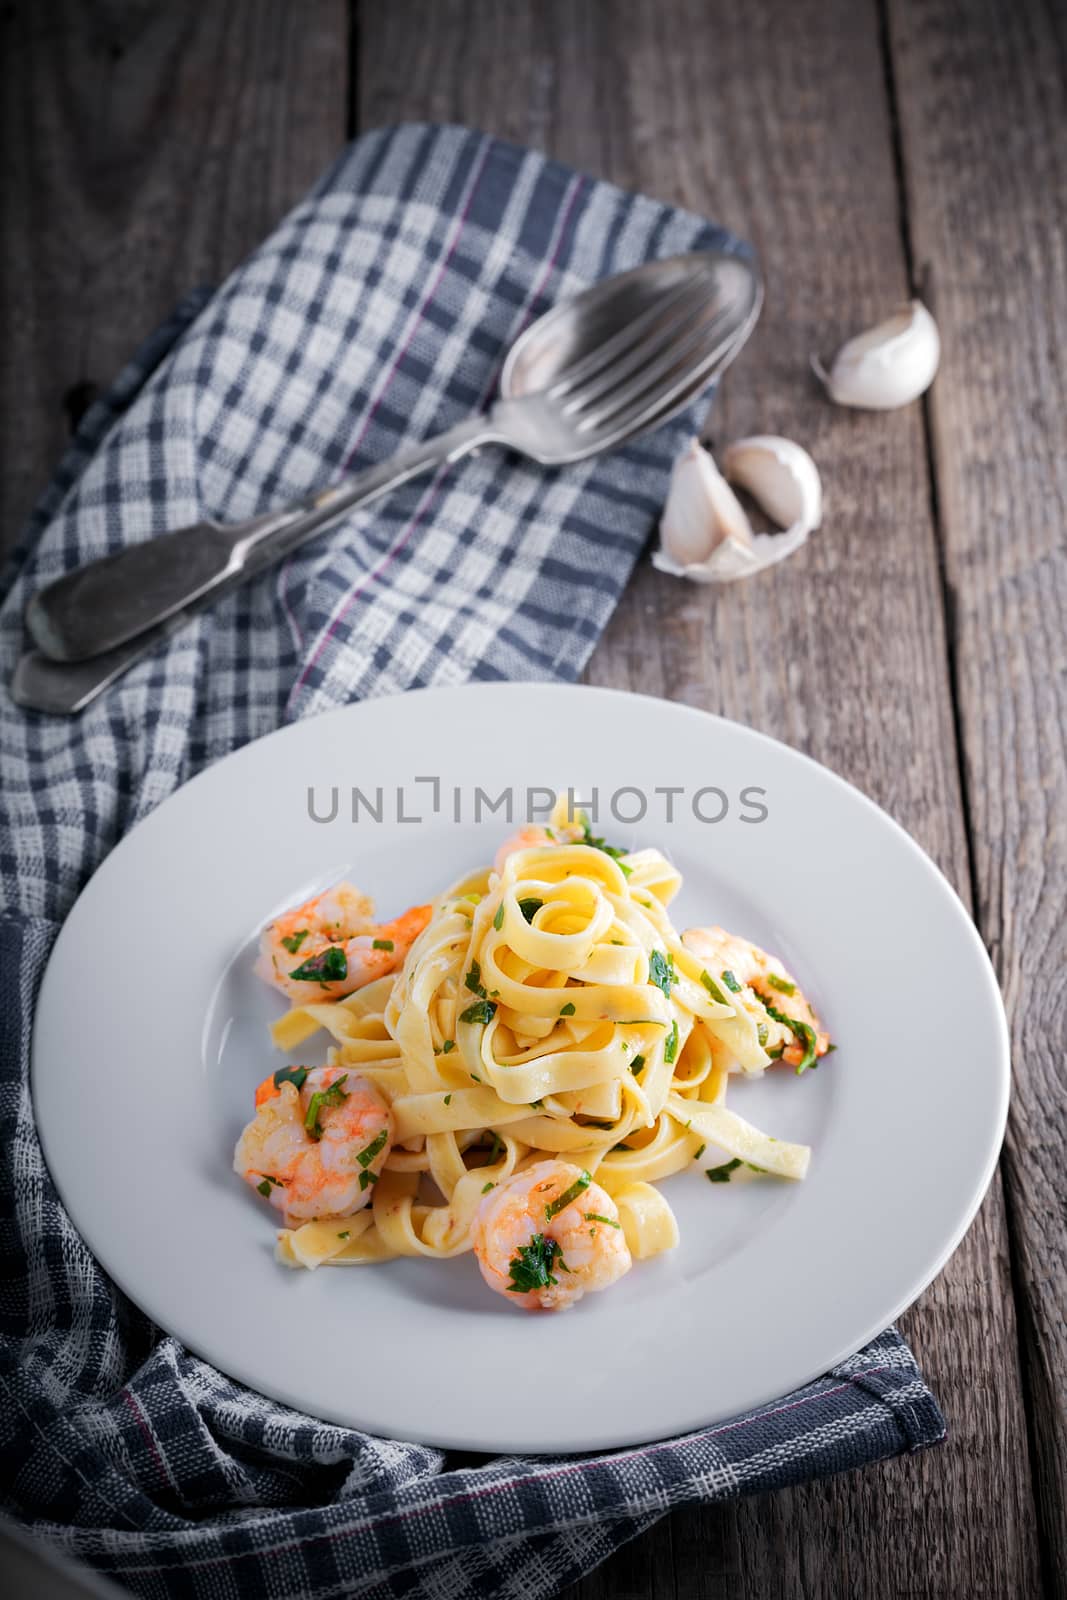 Tagliatelle with shrimps garlic on a wooden surface